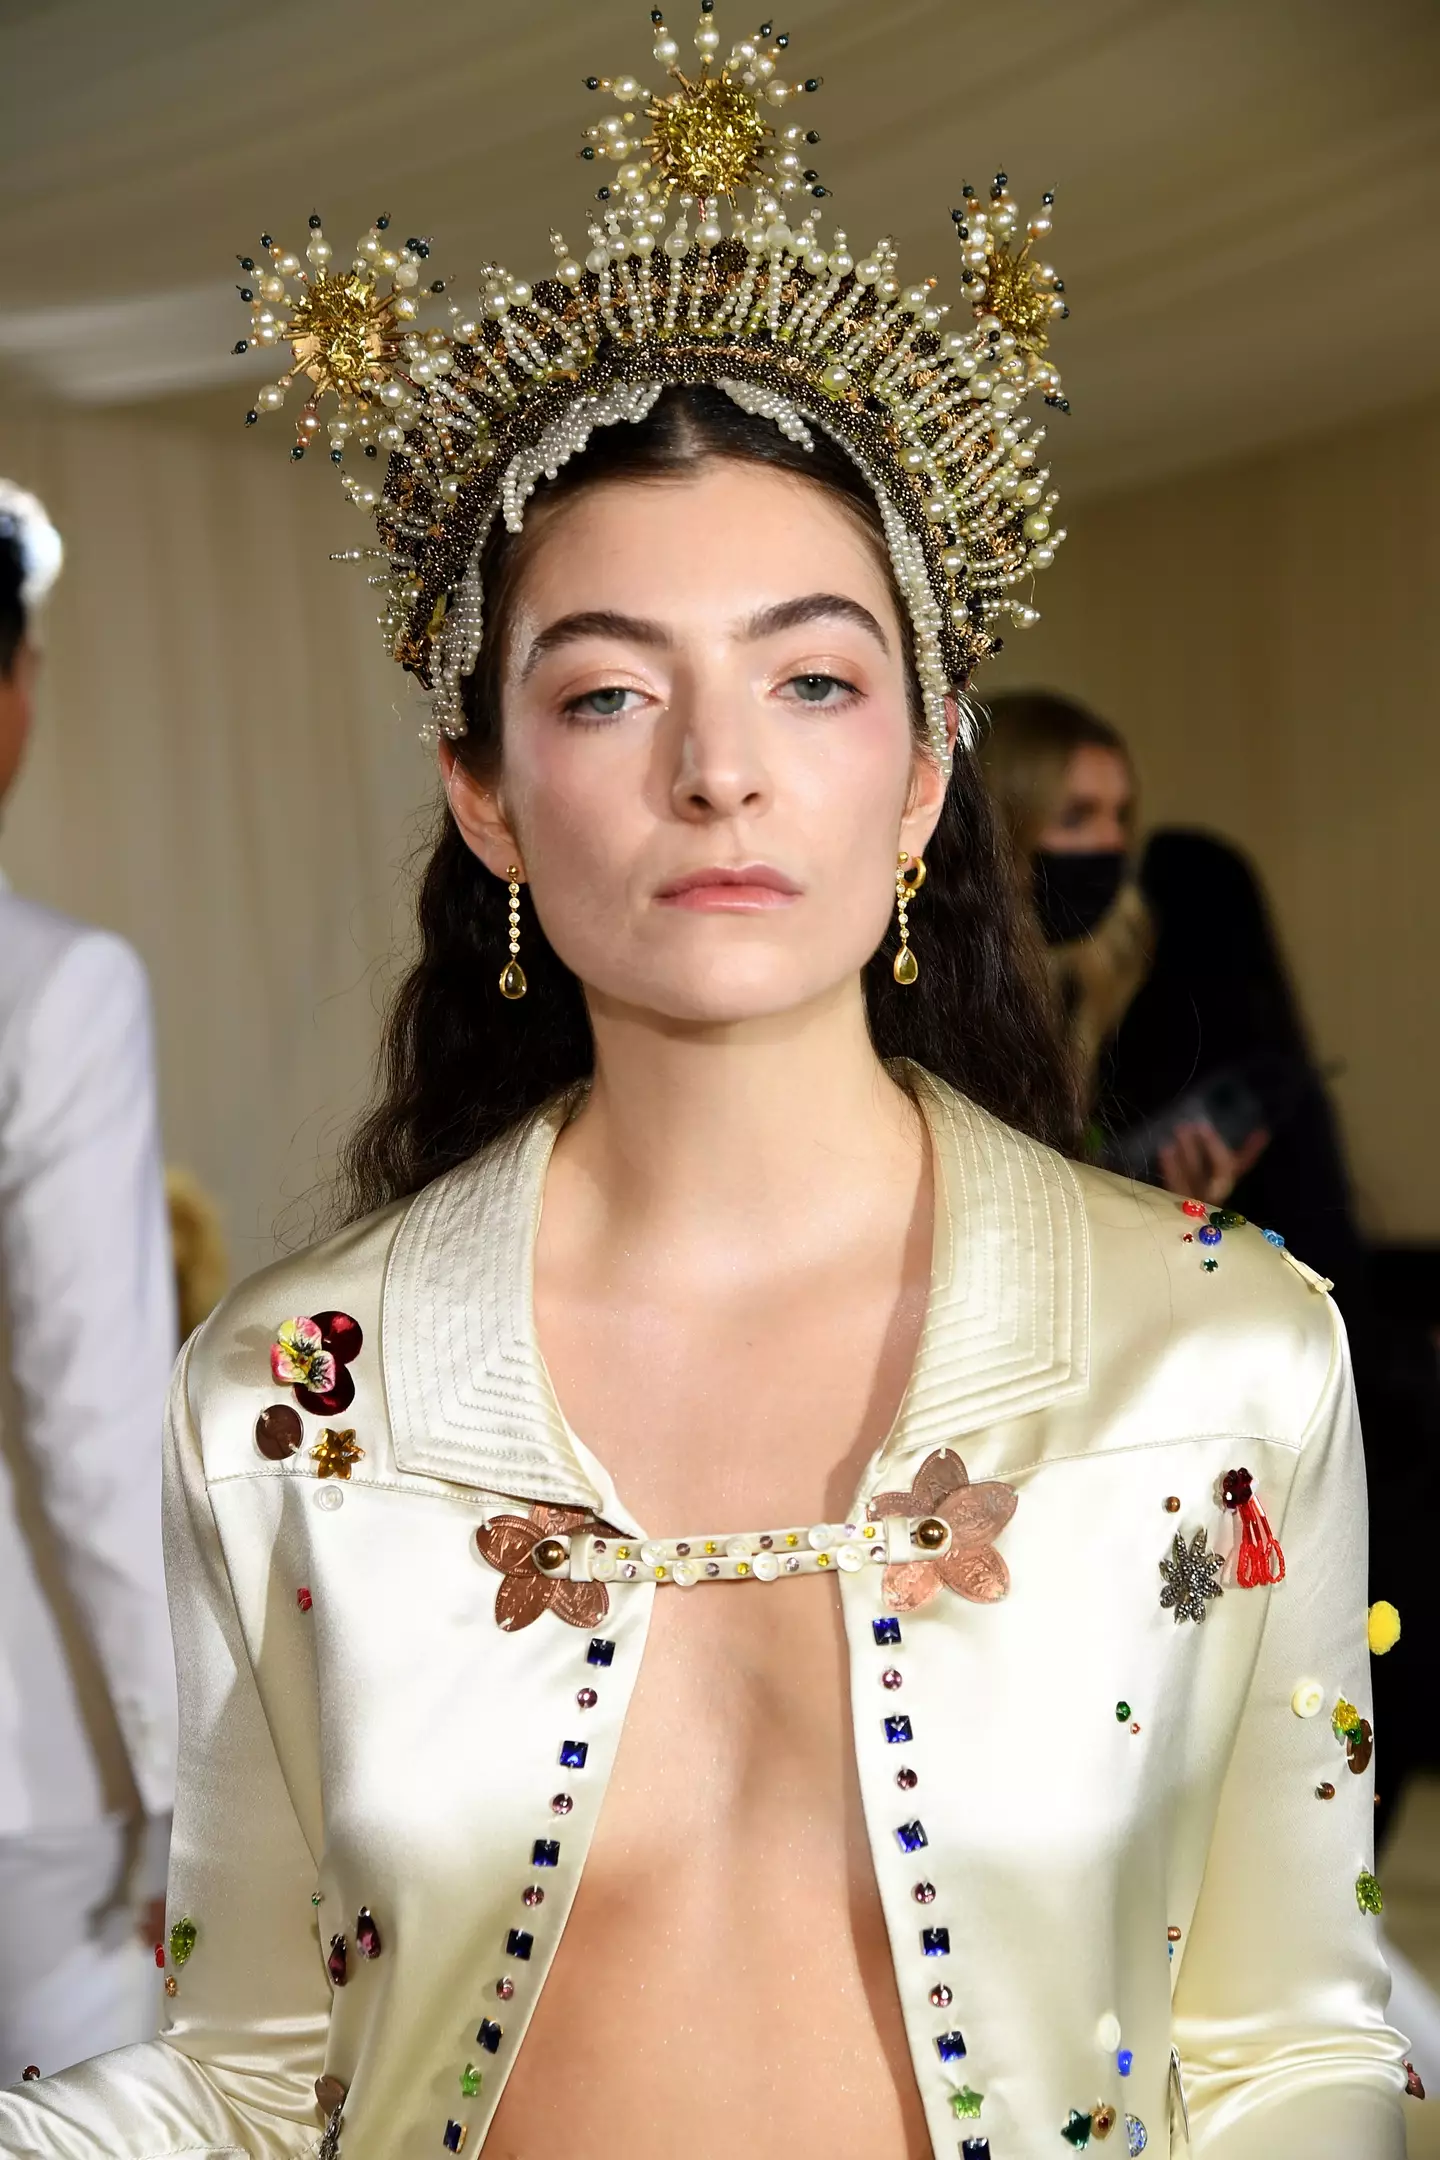 Lorde pictured at the 2021 Met Gala.